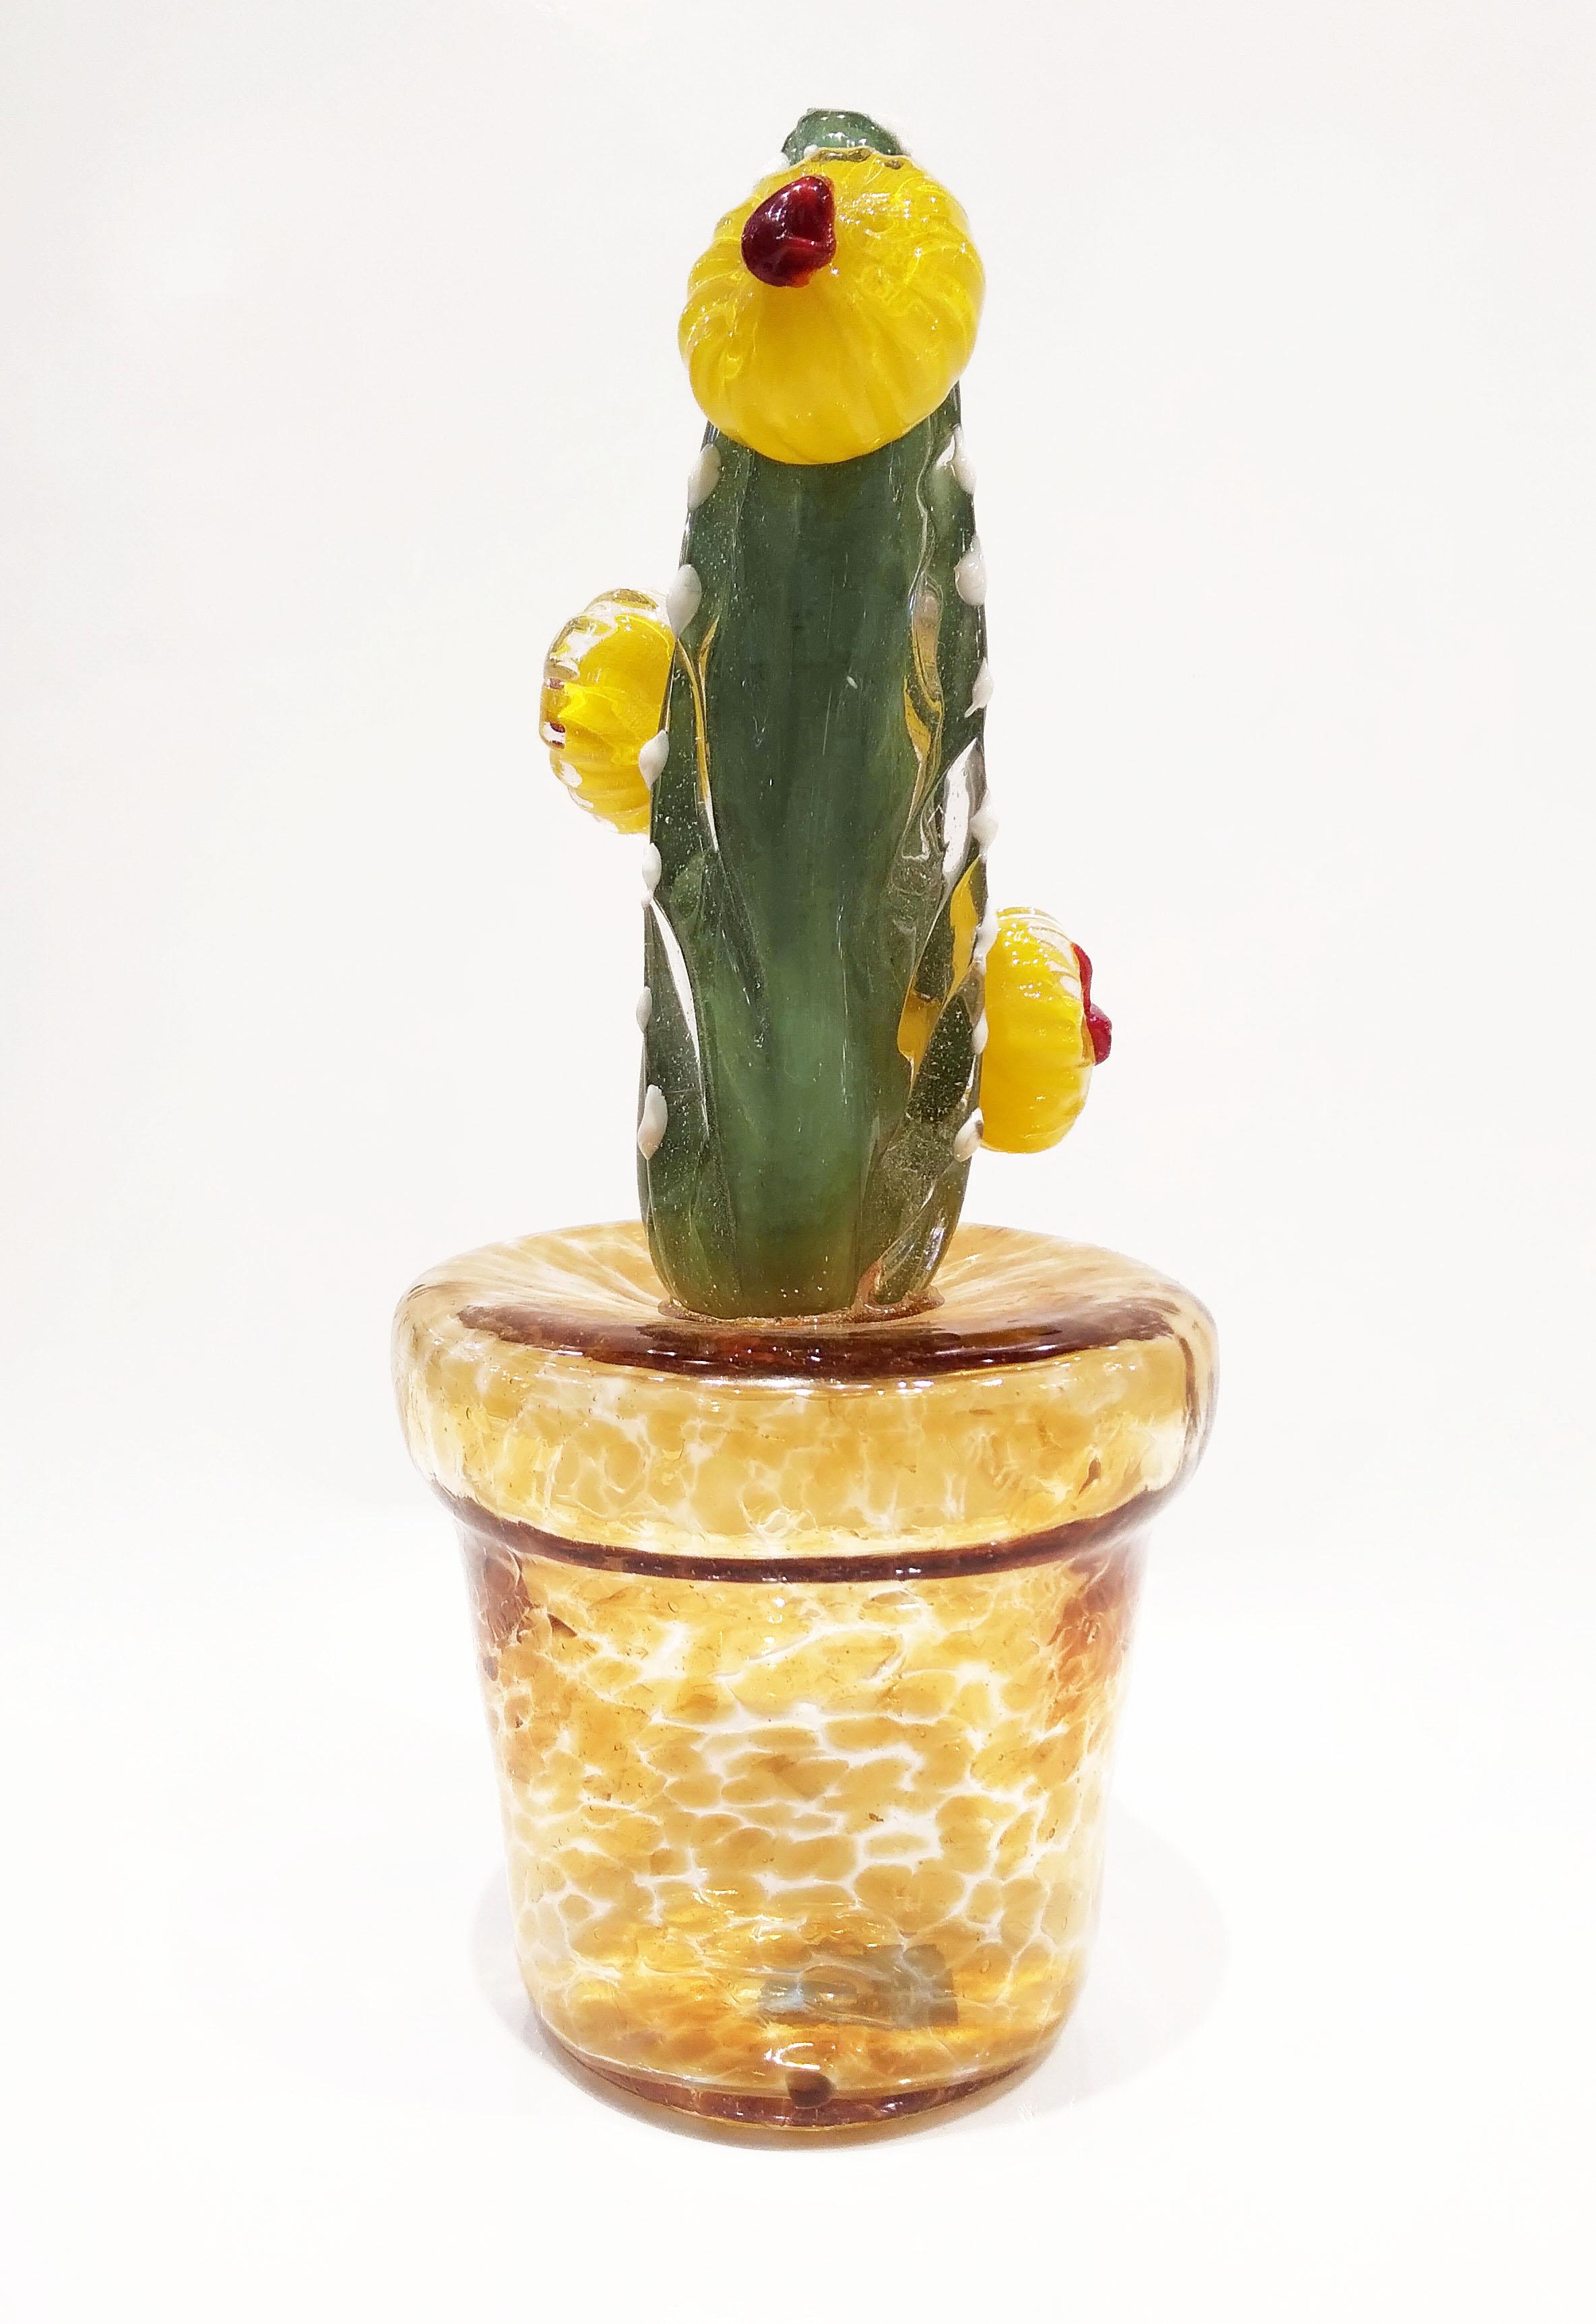 Organic Modern 2000s Italian Green Murano Glass Cactus Plant with Yellow Flowers in Gold Pot